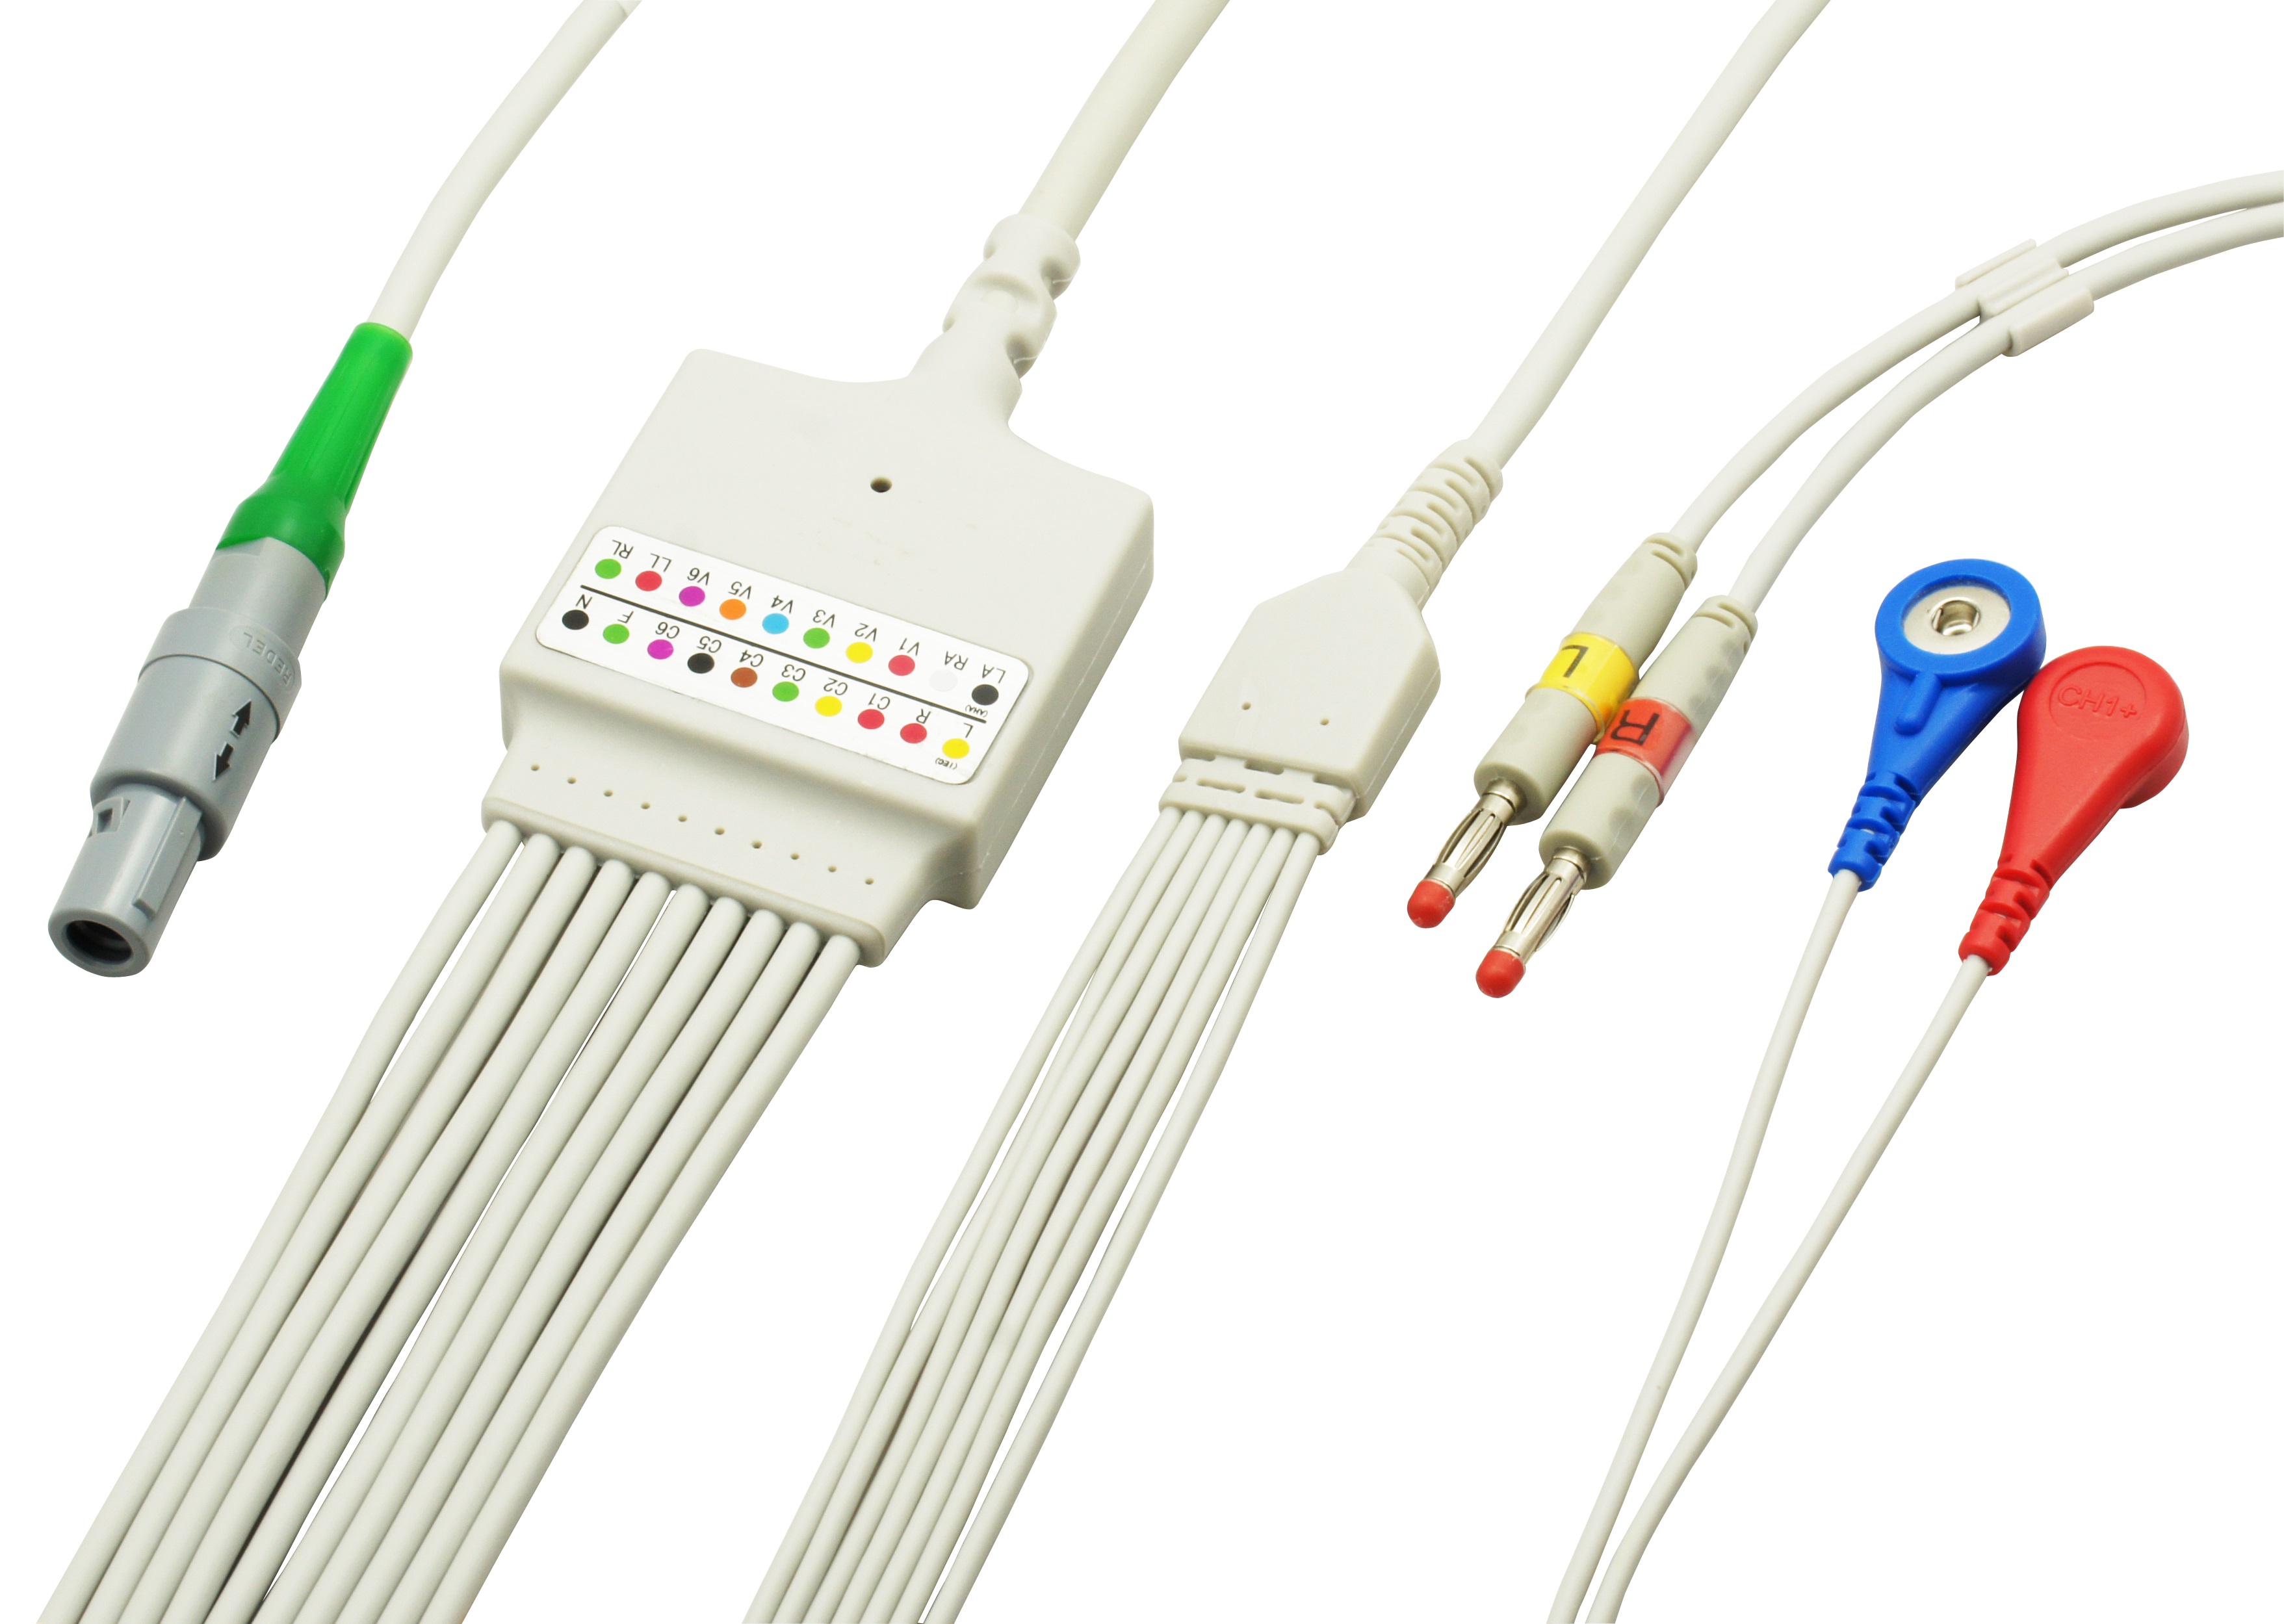 Well-designed Different Kinds Of Food Temperature Probe - ECG Trunk Cable and Leads – Med-link